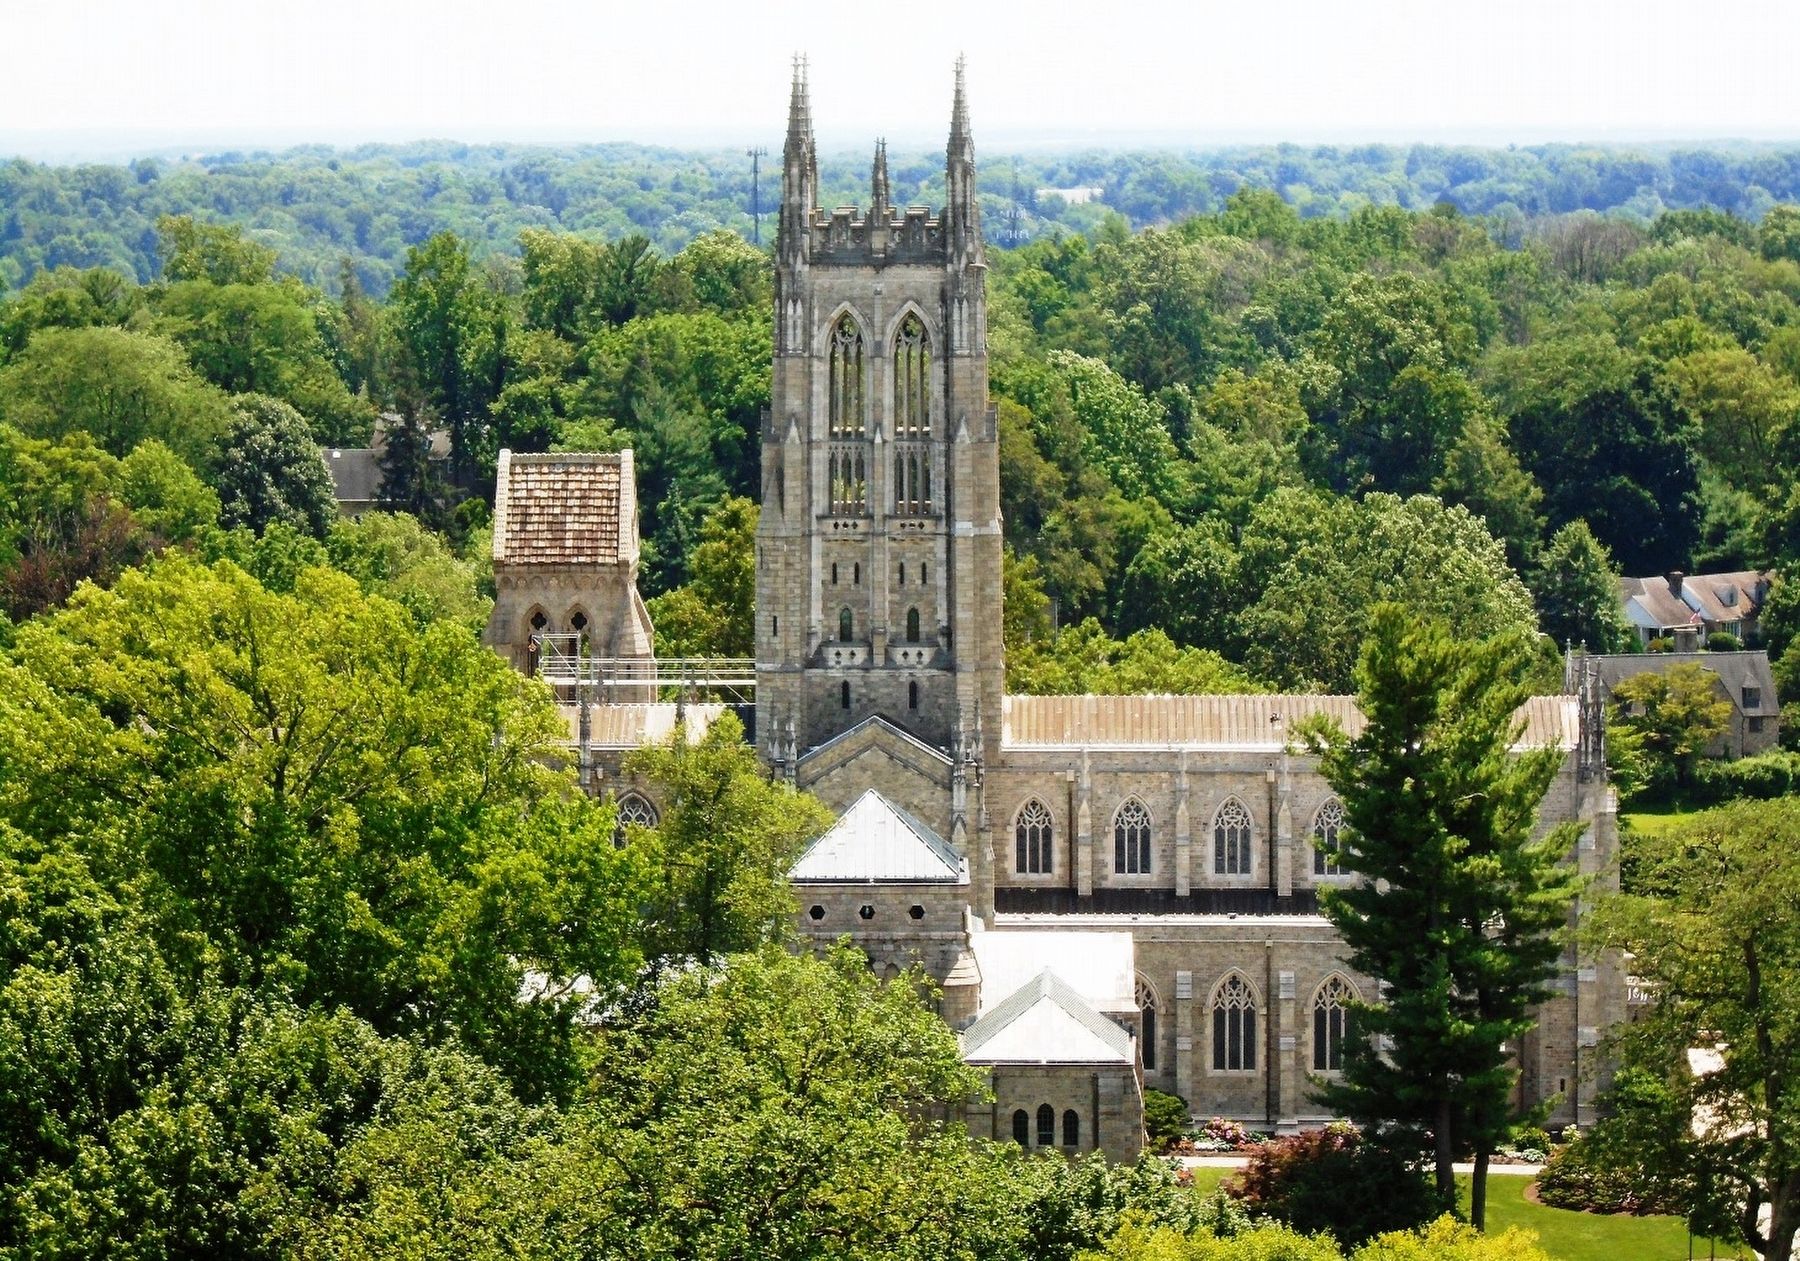 Bryn Athyn Cathedral image. Click for full size.